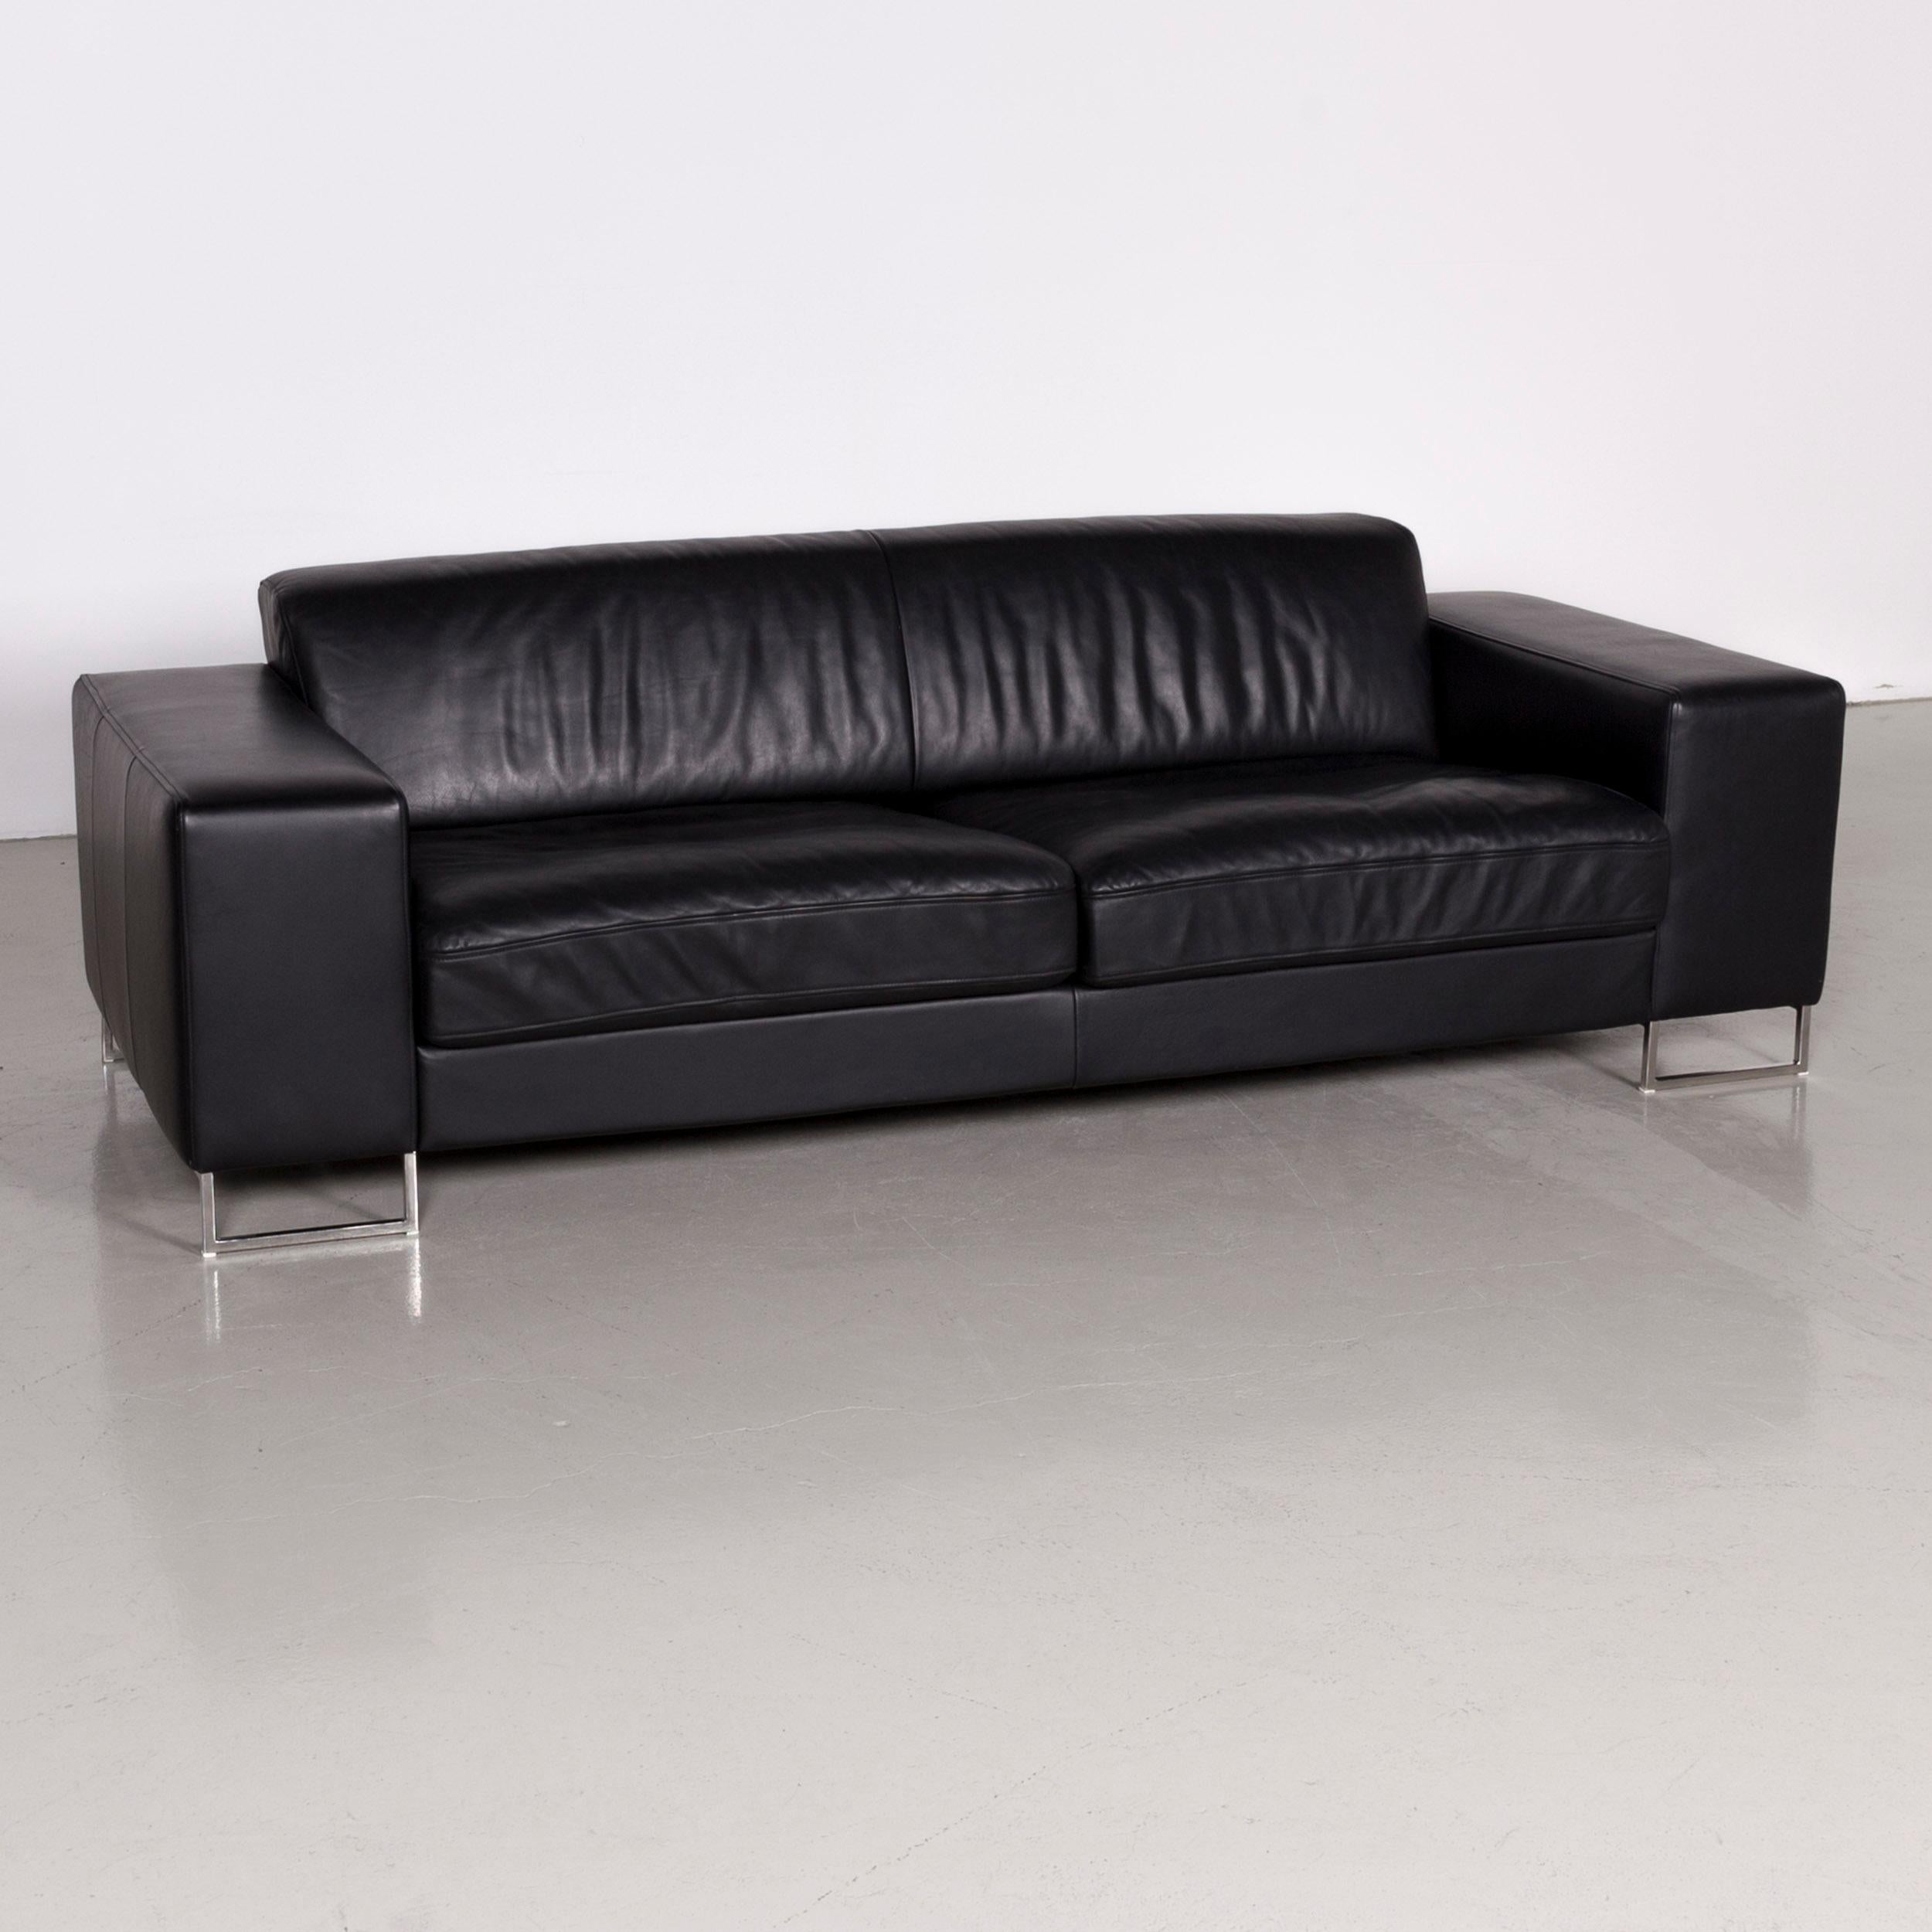 We bring to you a designer leather sofa black three-seat.